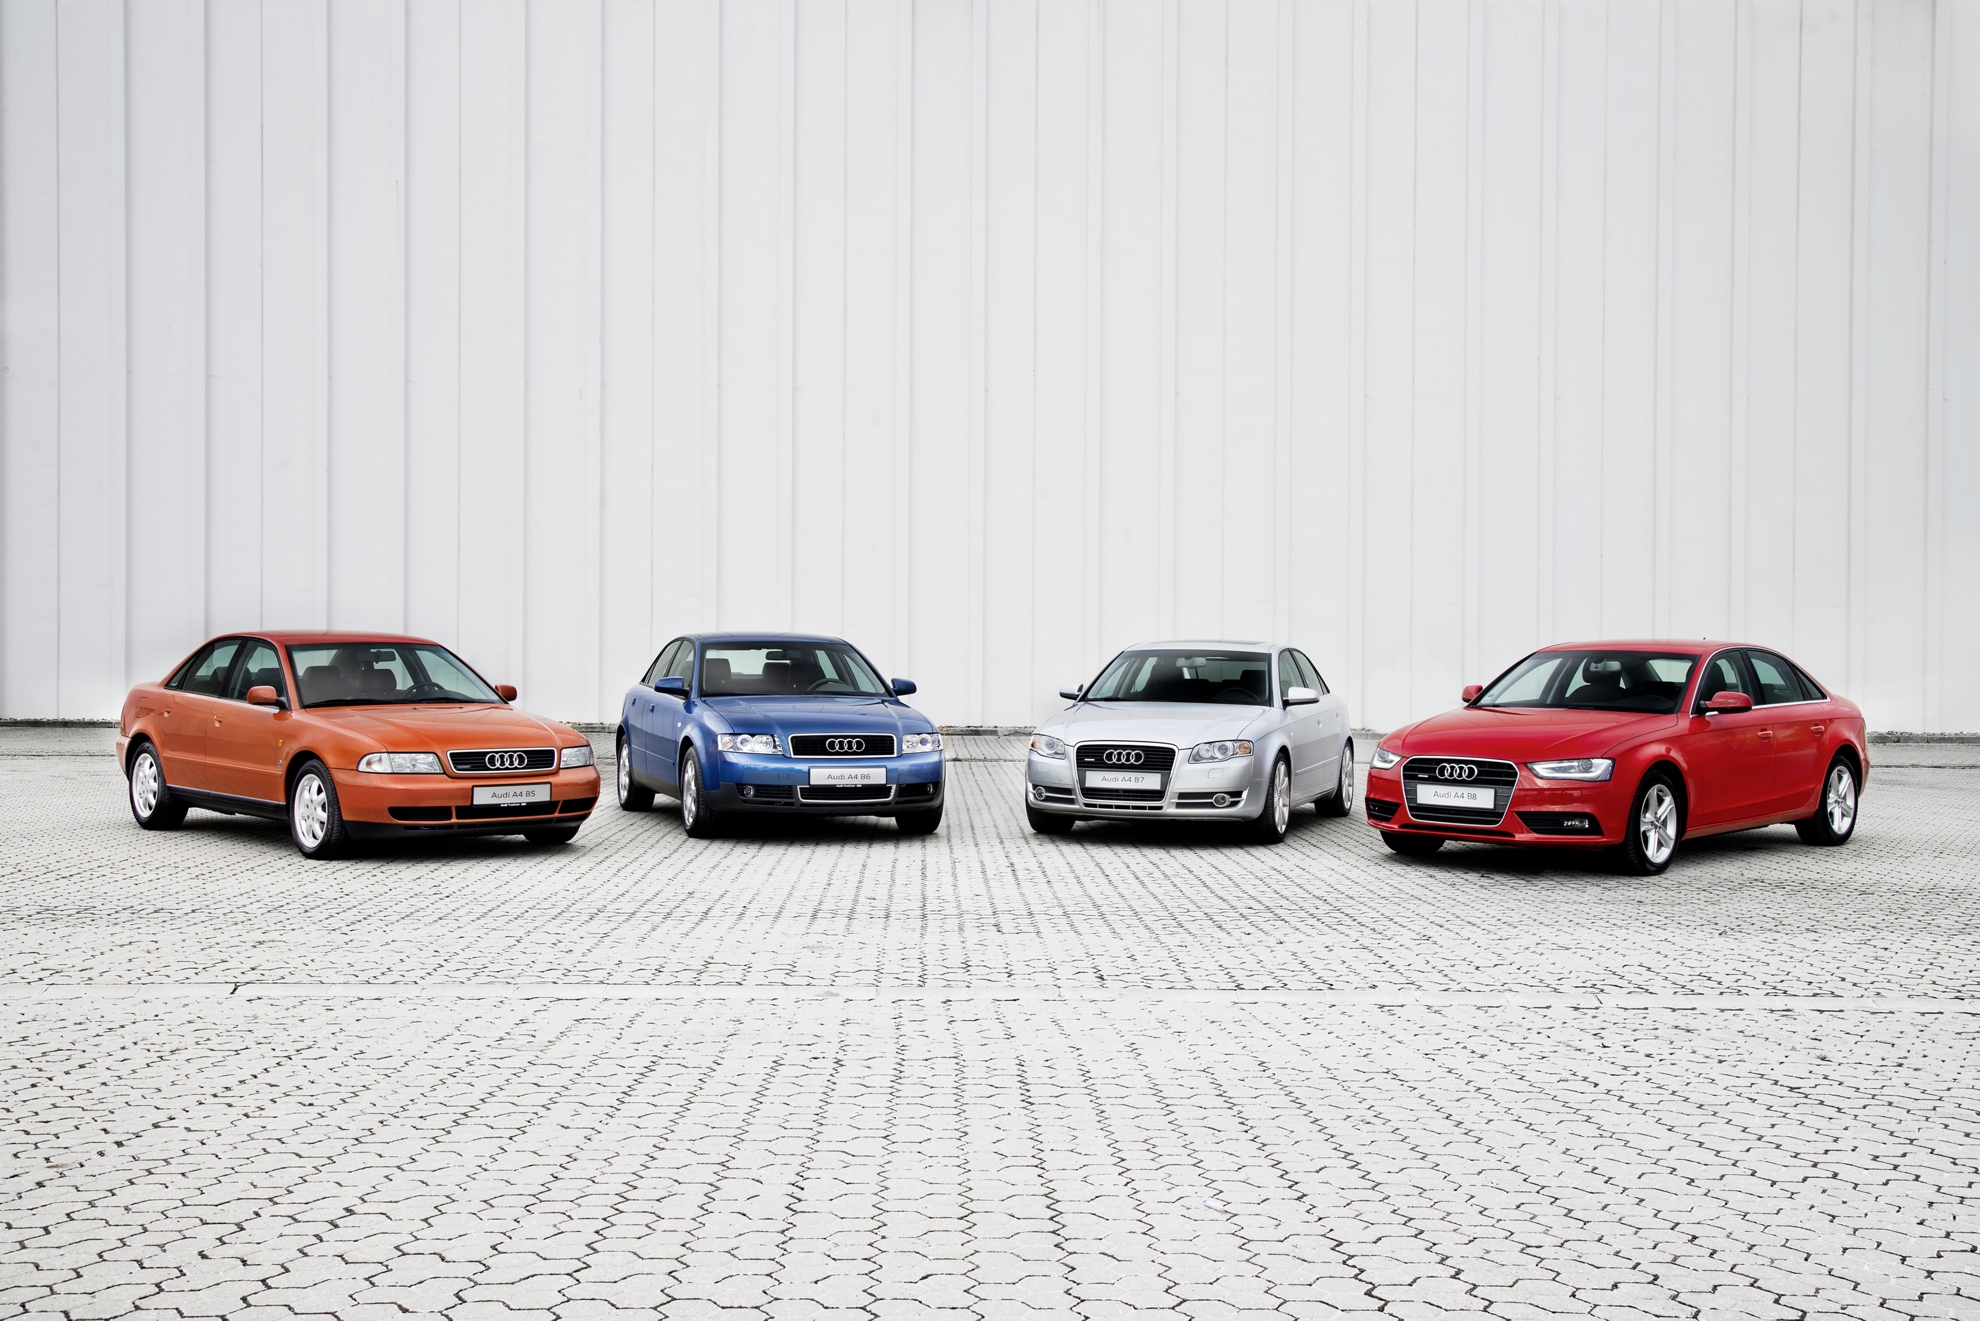 Production jubilee: 20 years of Audi A4 at Ingolstadt plant